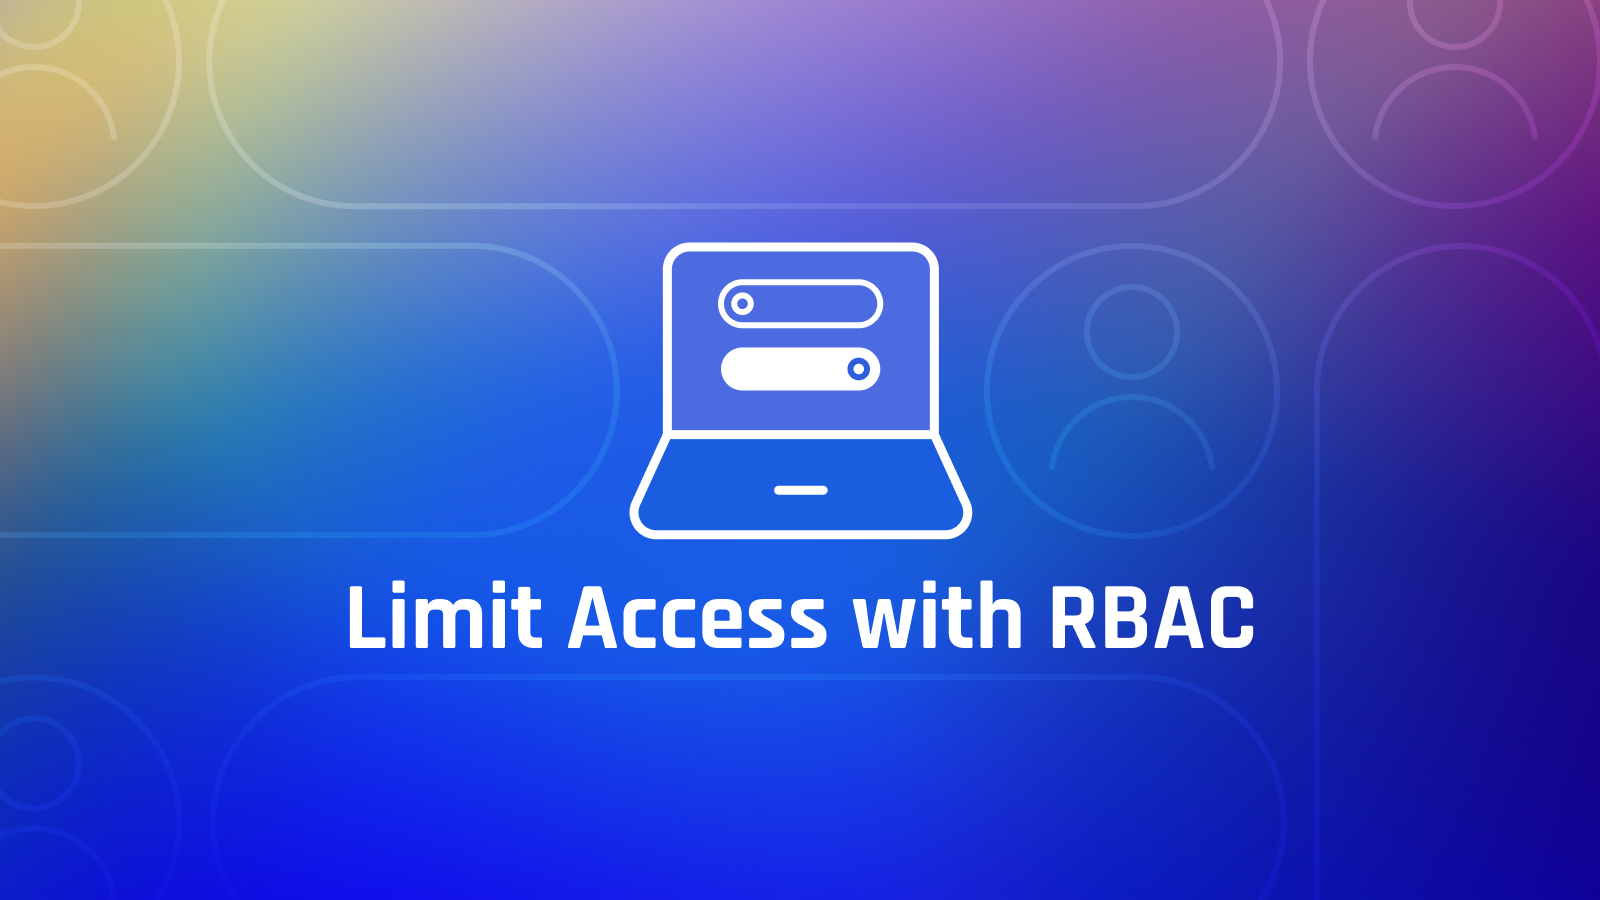 Give the Right Admins the Right Access With Role-Based Access Control (RBAC)